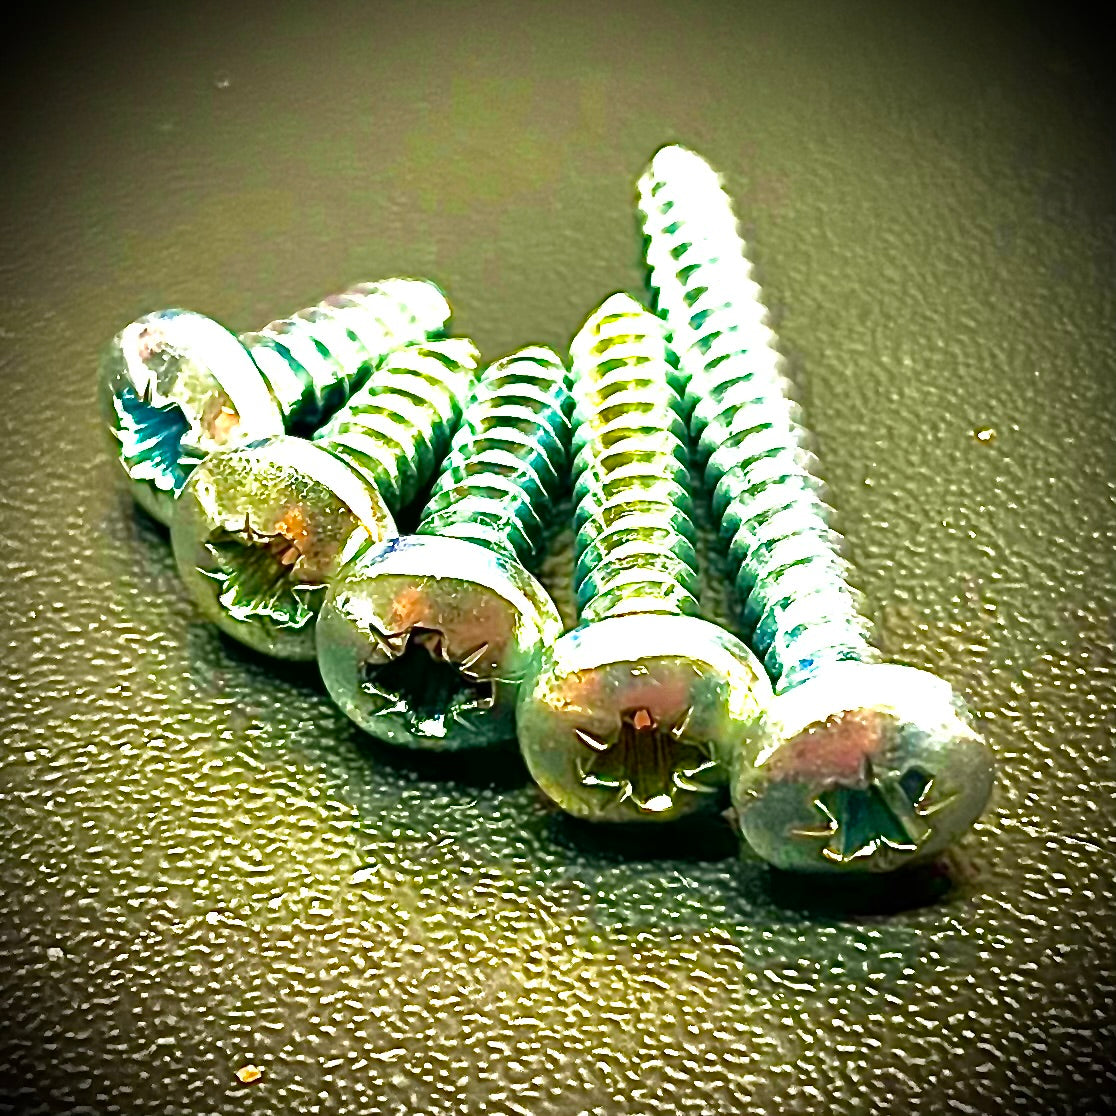 No. 10, 4.8mm Pozi Pan Self Tapping Screws AB Point BZP - Fixaball Ltd. Fixings and Fasteners UK